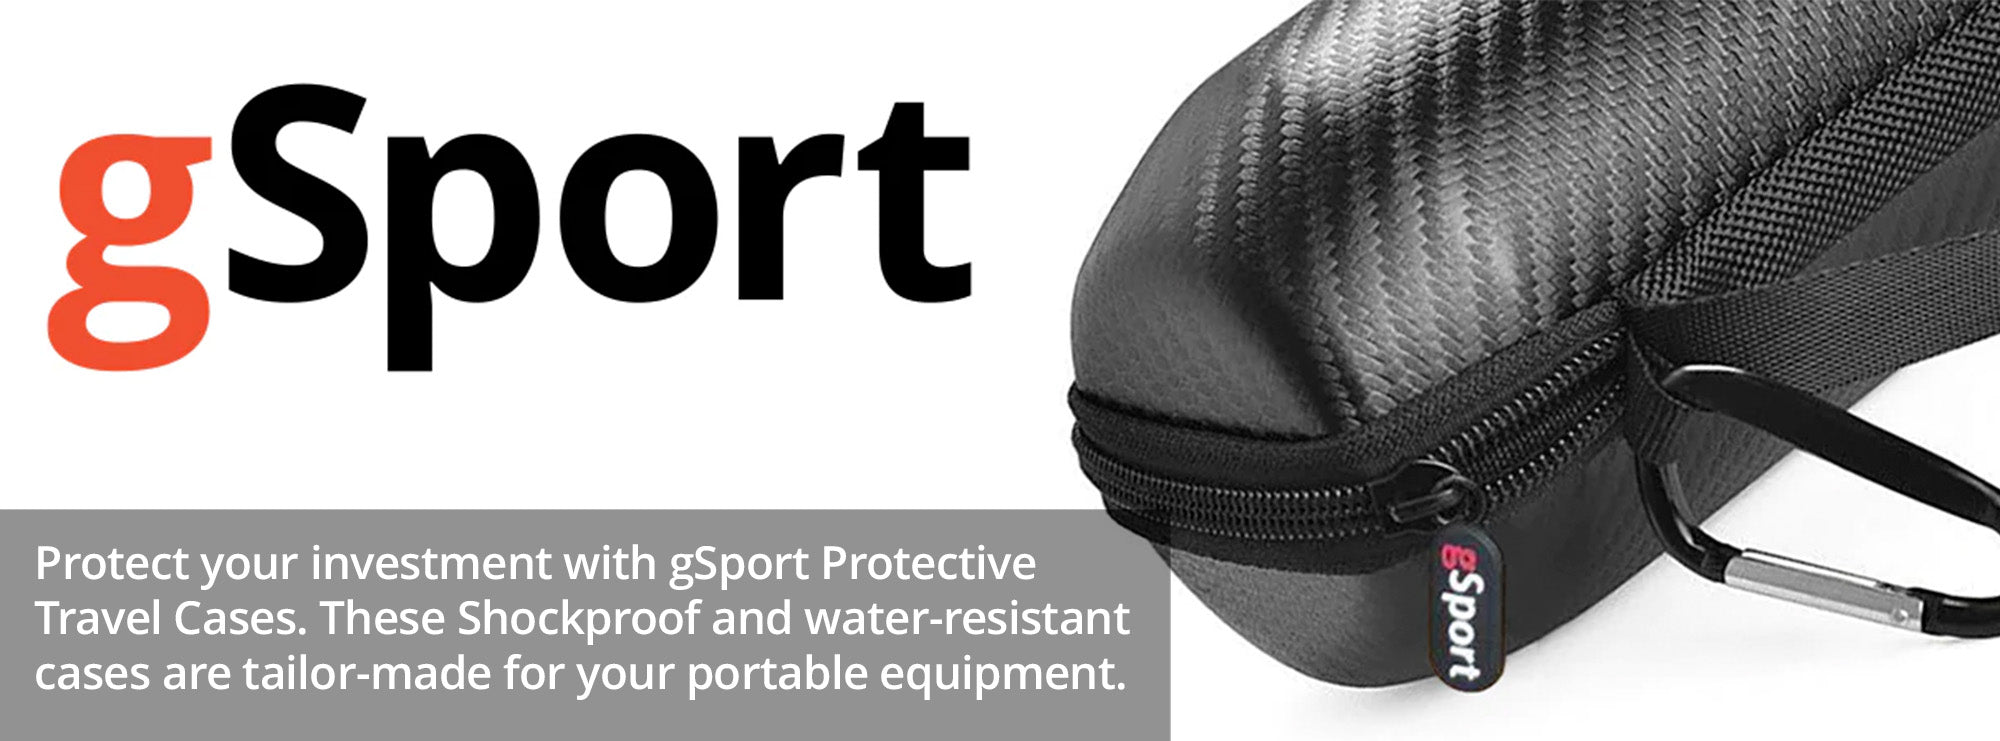 Protect your investment with gSport Protective Travel Cases. These Shockproof and water-resistant cases are tailor-made for your portable equipment.